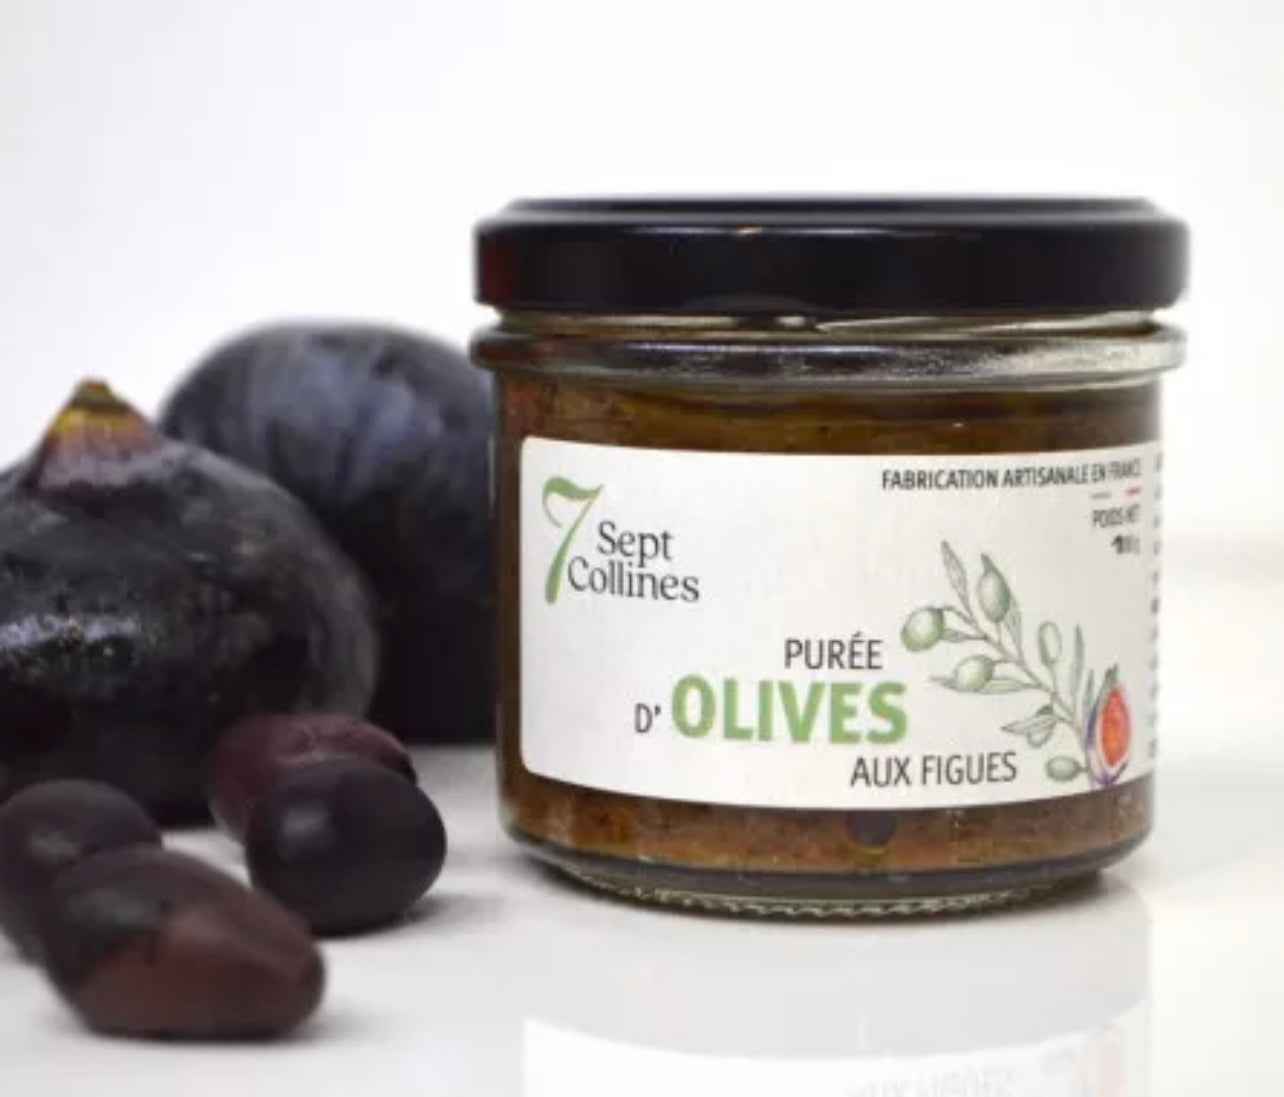 Olive puree with figs - 100g